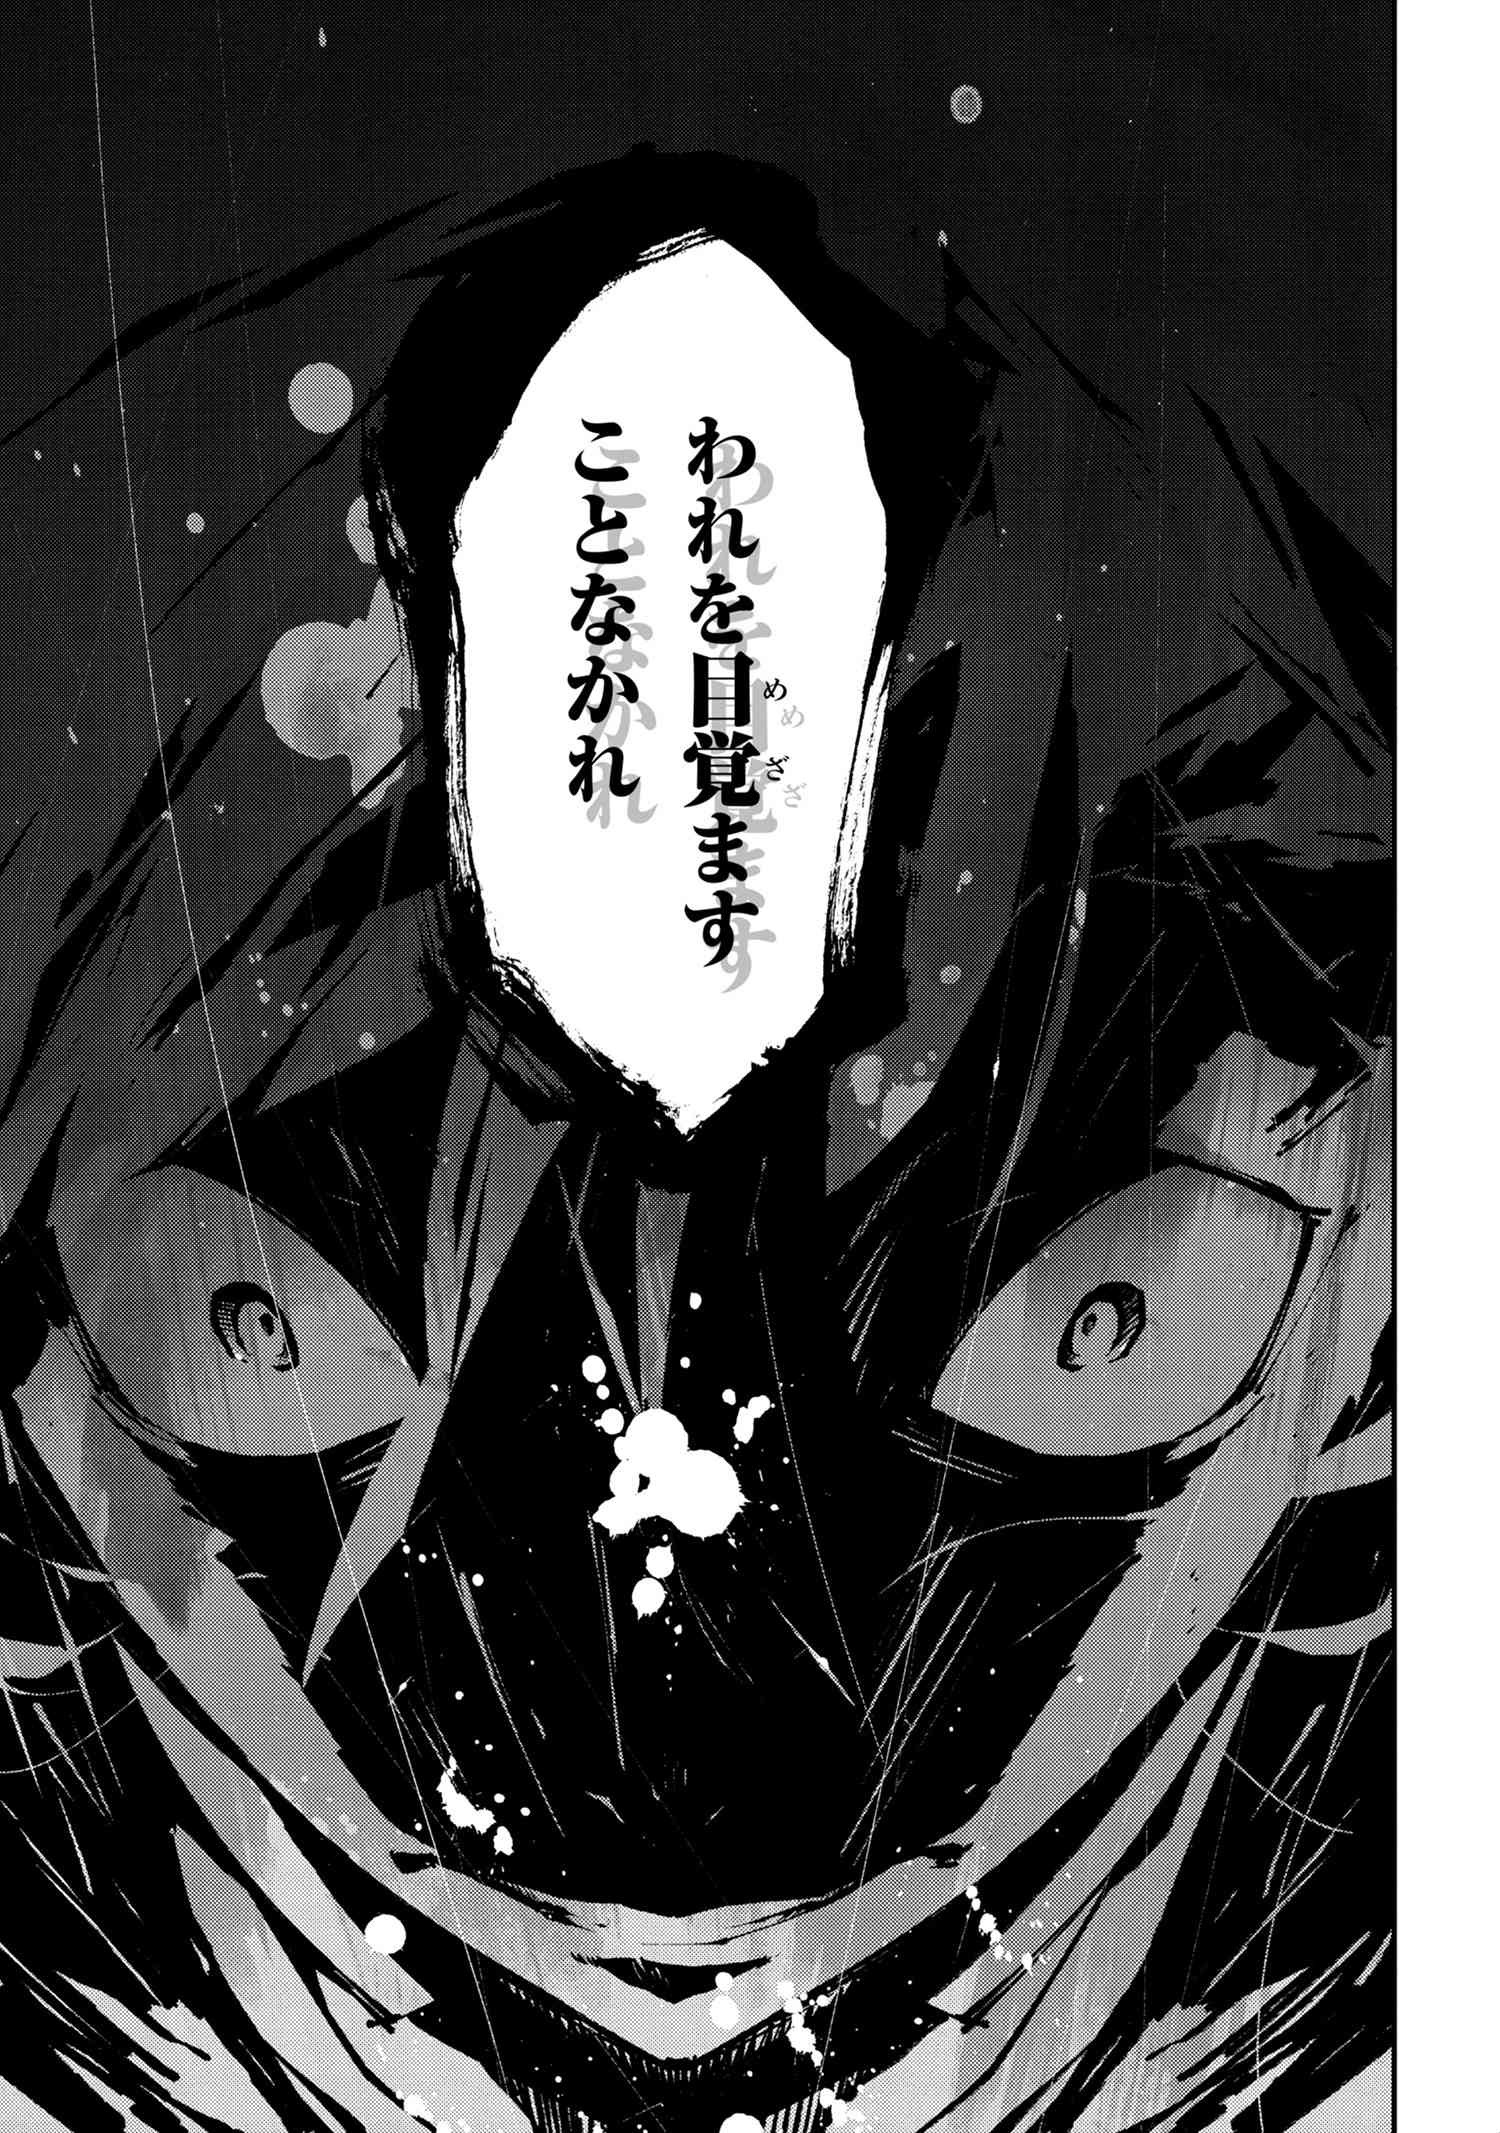 Bungou Stray Dogs: Dead Apple - Chapter 13-2 - Page 3